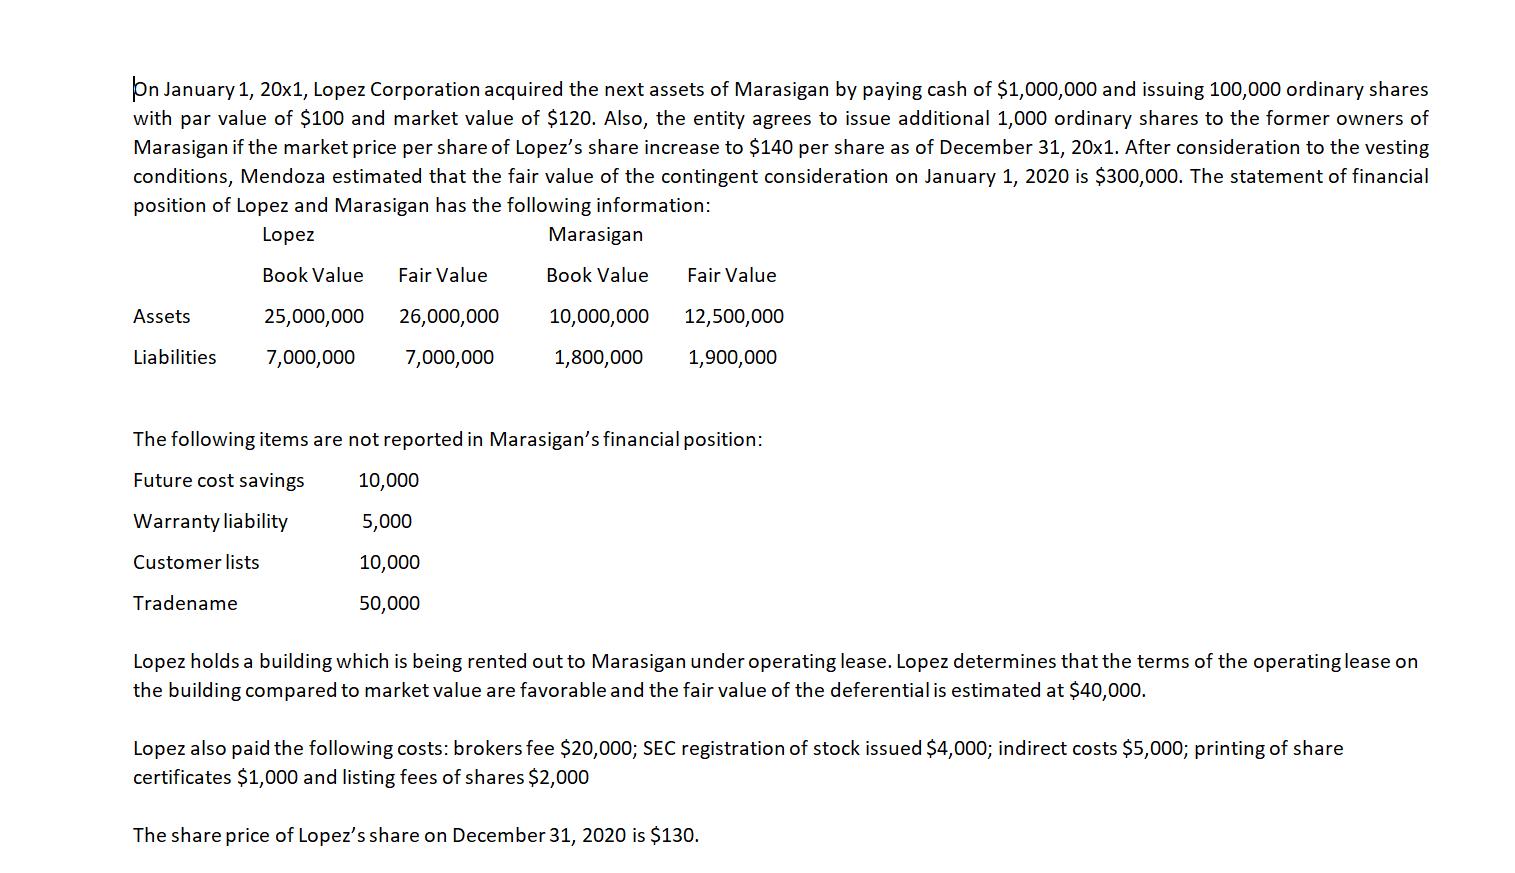 On January 1, 20x1, Lopez Corporation acquired the next assets of Marasigan by paying cash of $1,000,000 and